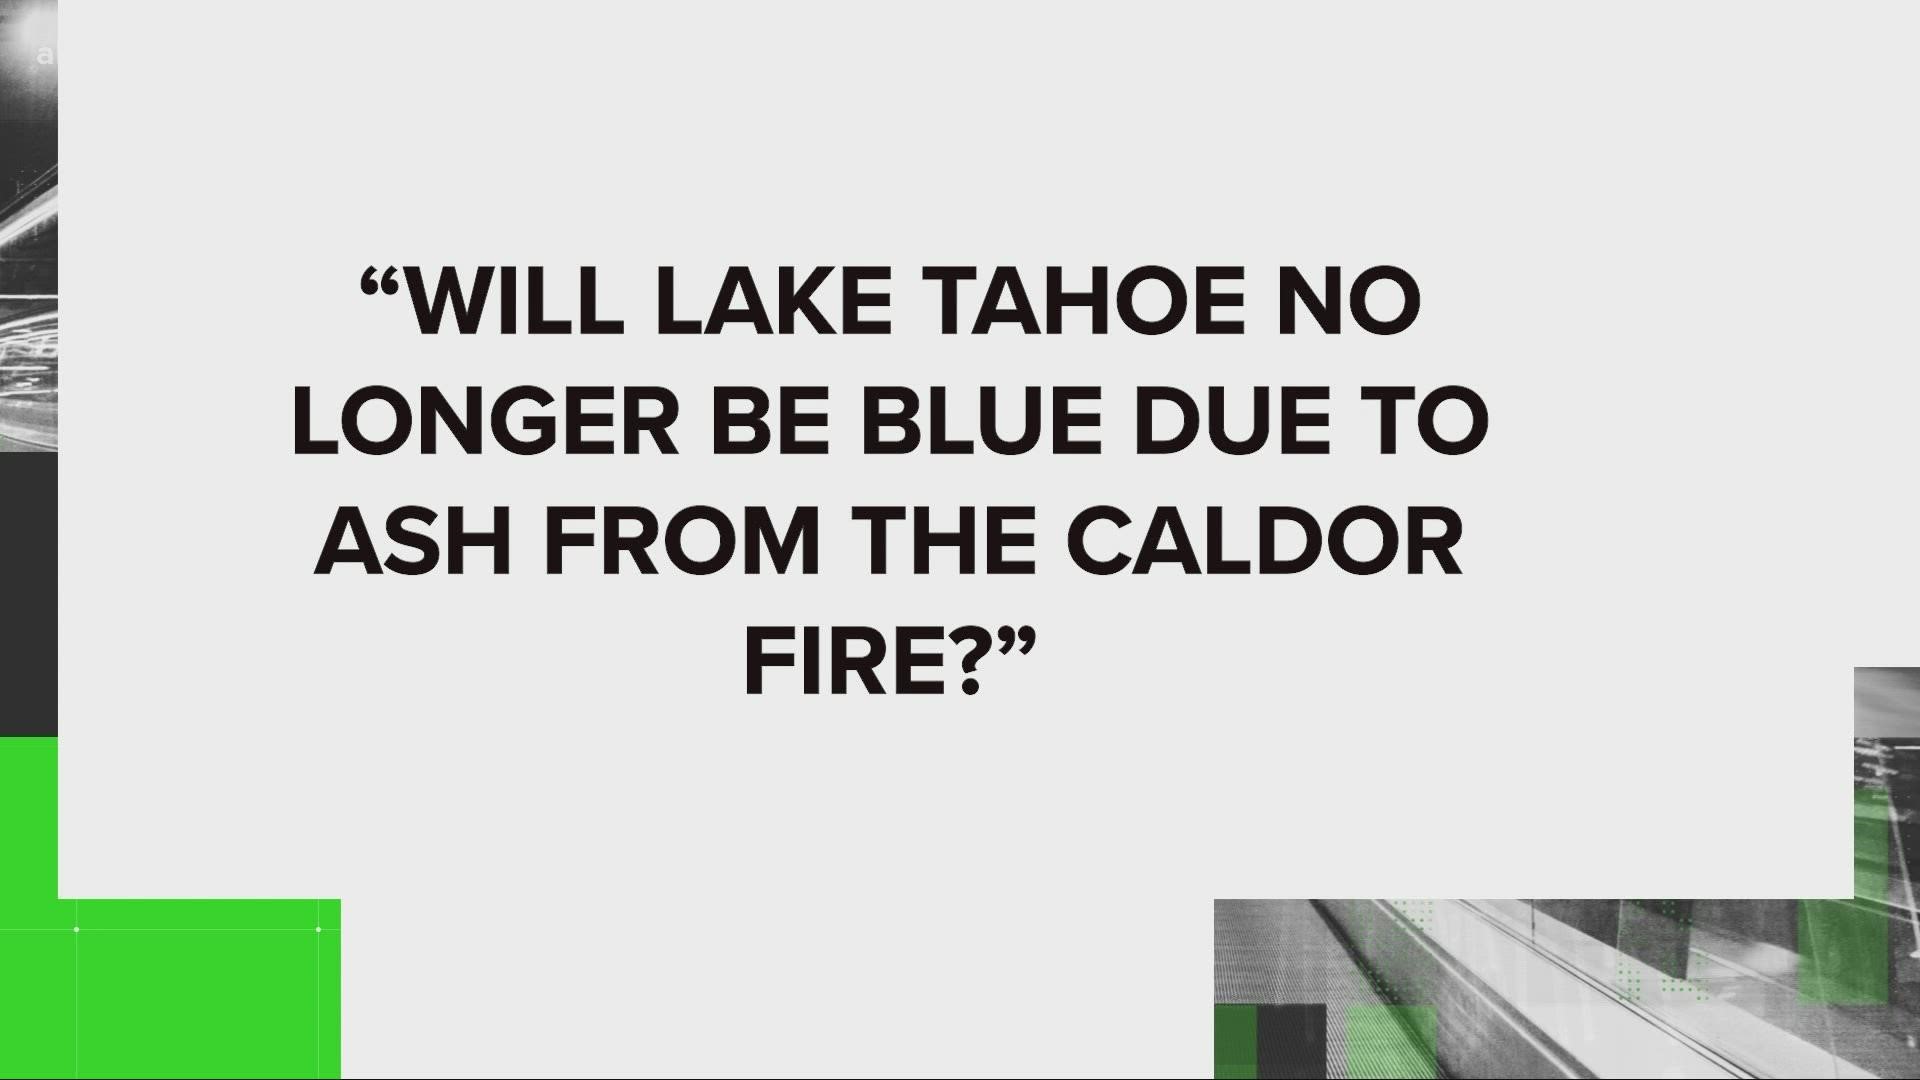 Online people are talking about the beauty of Lake Tahoe and fears that ash from the Caldor Fire will have a negative every lasting affect.